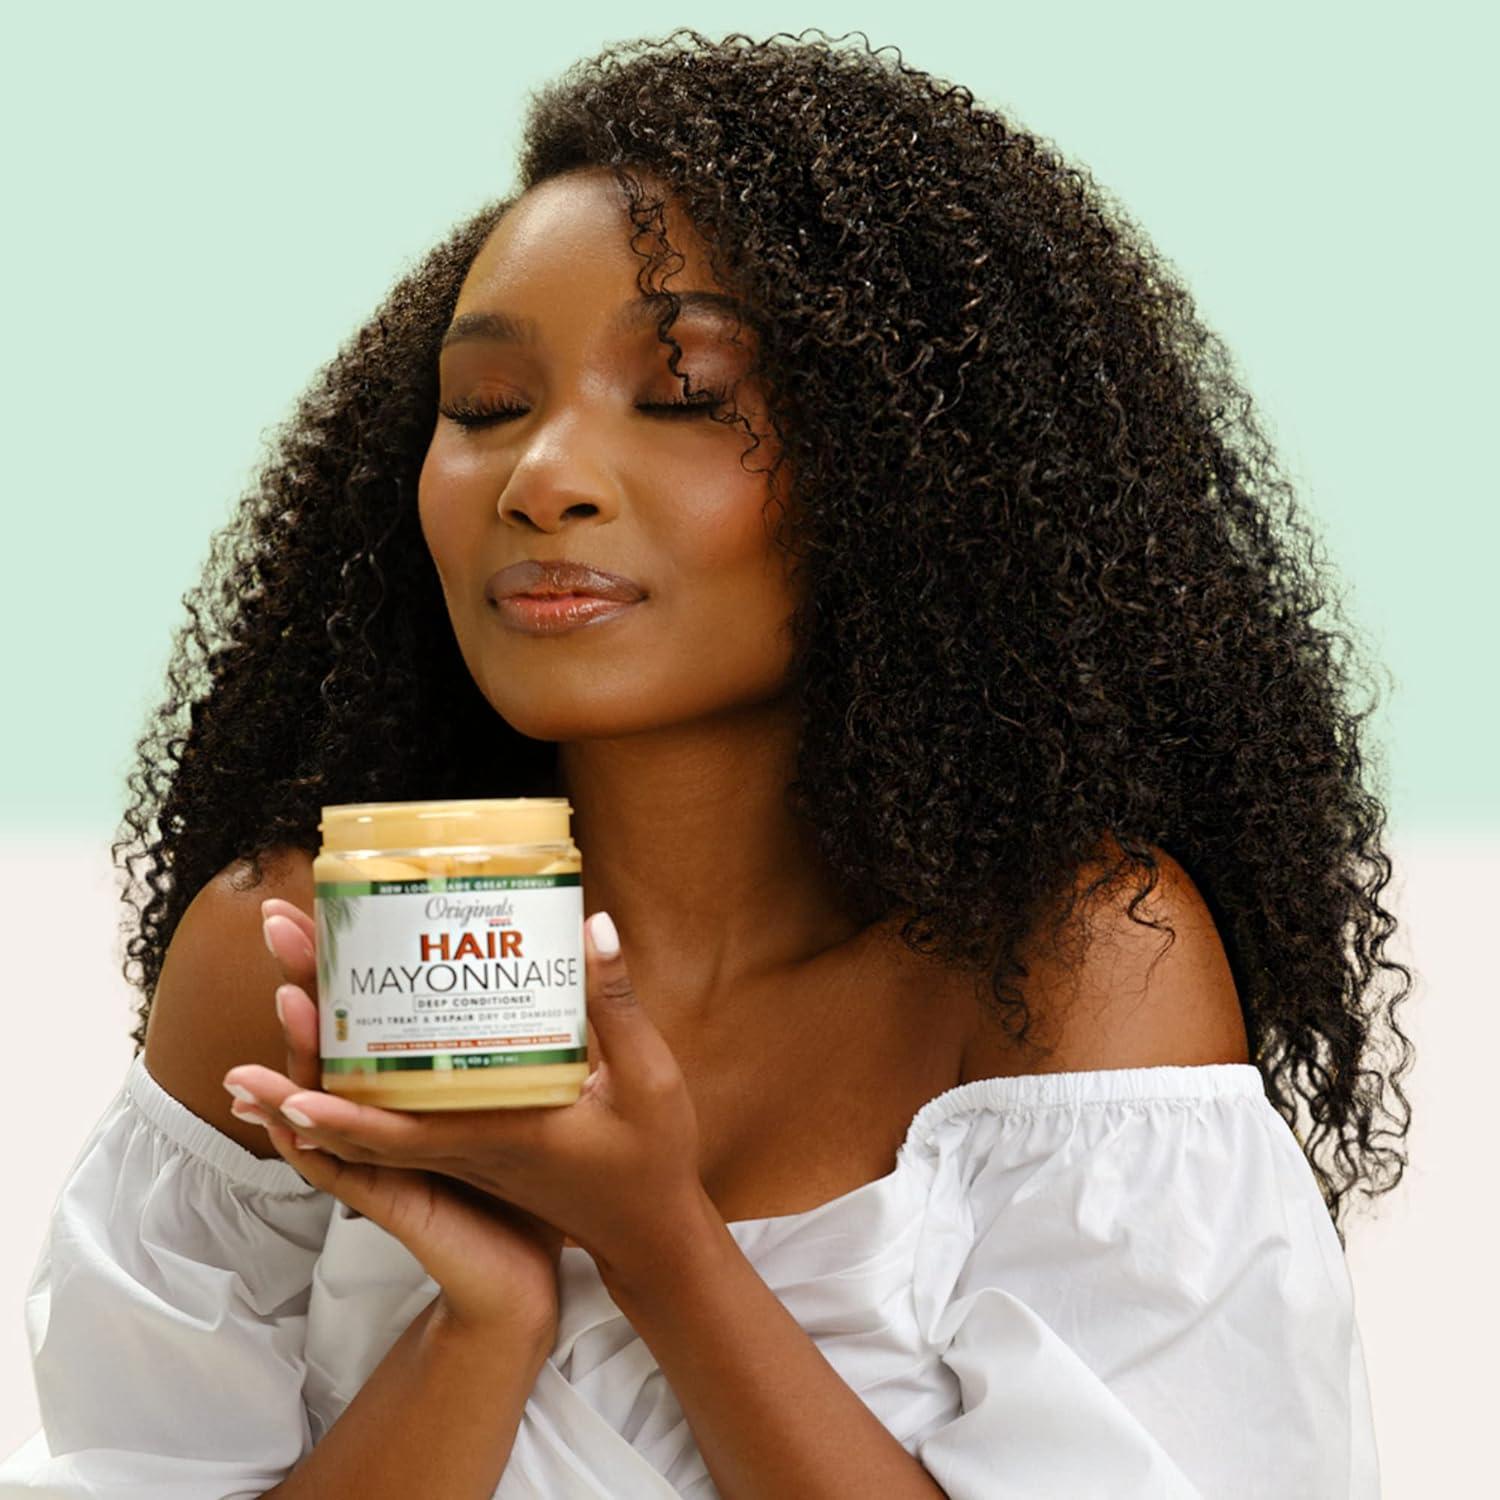 Product Review: Organics by Africa's Best Hair Mayonnaise.